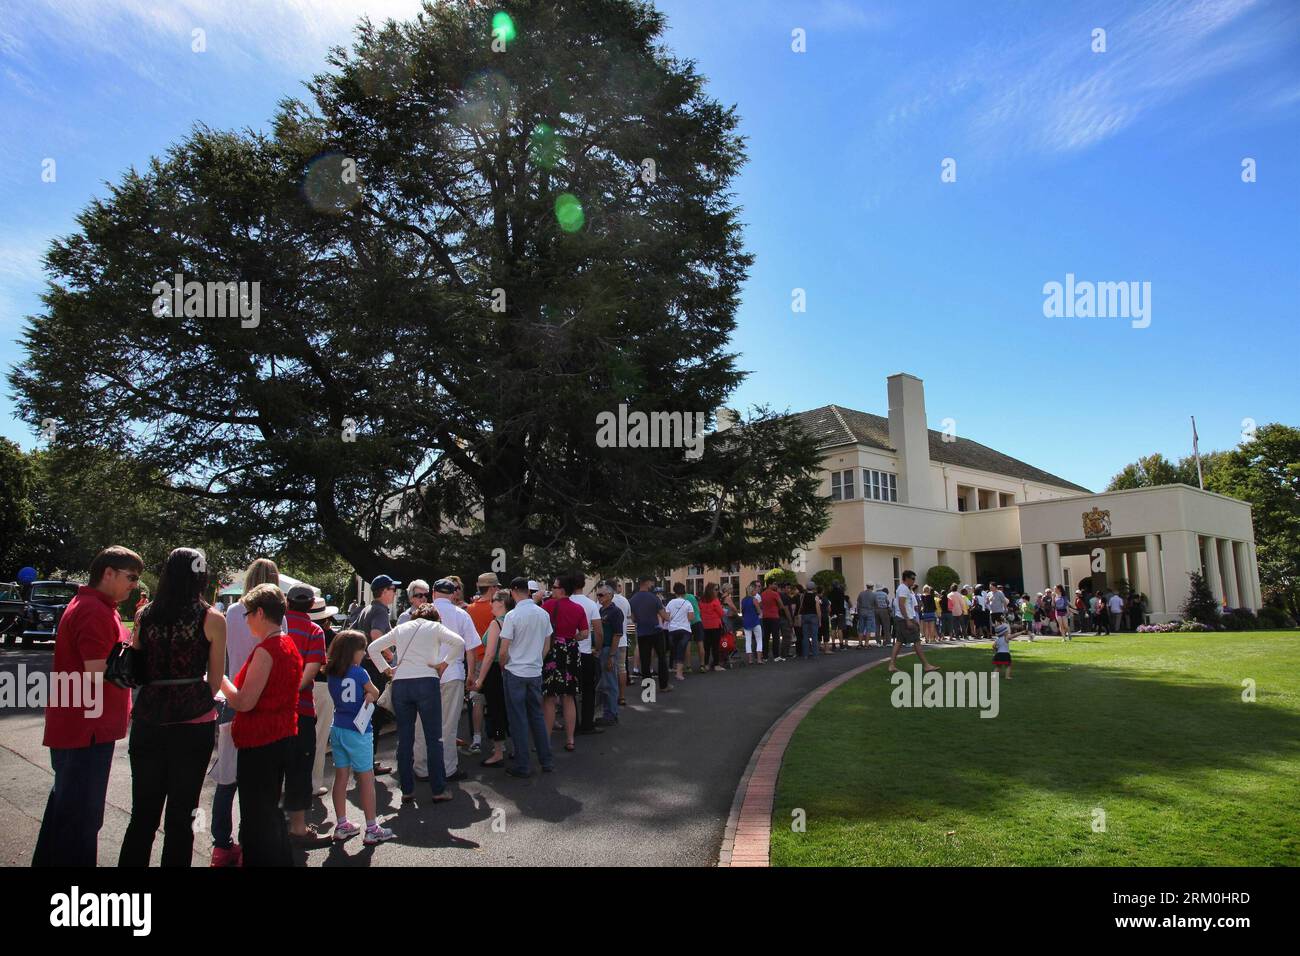 Bildnummer: 59426985  Datum: 24.03.2013  Copyright: imago/Xinhua (130324) -- CANBERRA, March 24, 2013 (Xinhua) -- Visitors queue to visit the Government House on its open day in Canberra, Australia, on March 24, 2013. The official residence of Australian Governor-General opens for public visiting on the annual Government House Open Day. (Xinhua/Justin Qian) AUSTRALIA-CANBERRA-GOVERNMENT HOUSE-OPEN DAY PUBLICATIONxNOTxINxCHN Politik Tag der offenen Tür xas x0x 2013 quer Aufmacher premiumd      59426985 Date 24 03 2013 Copyright Imago XINHUA  Canberra March 24 2013 XINHUA Visitors Queue to Visit Stock Photo